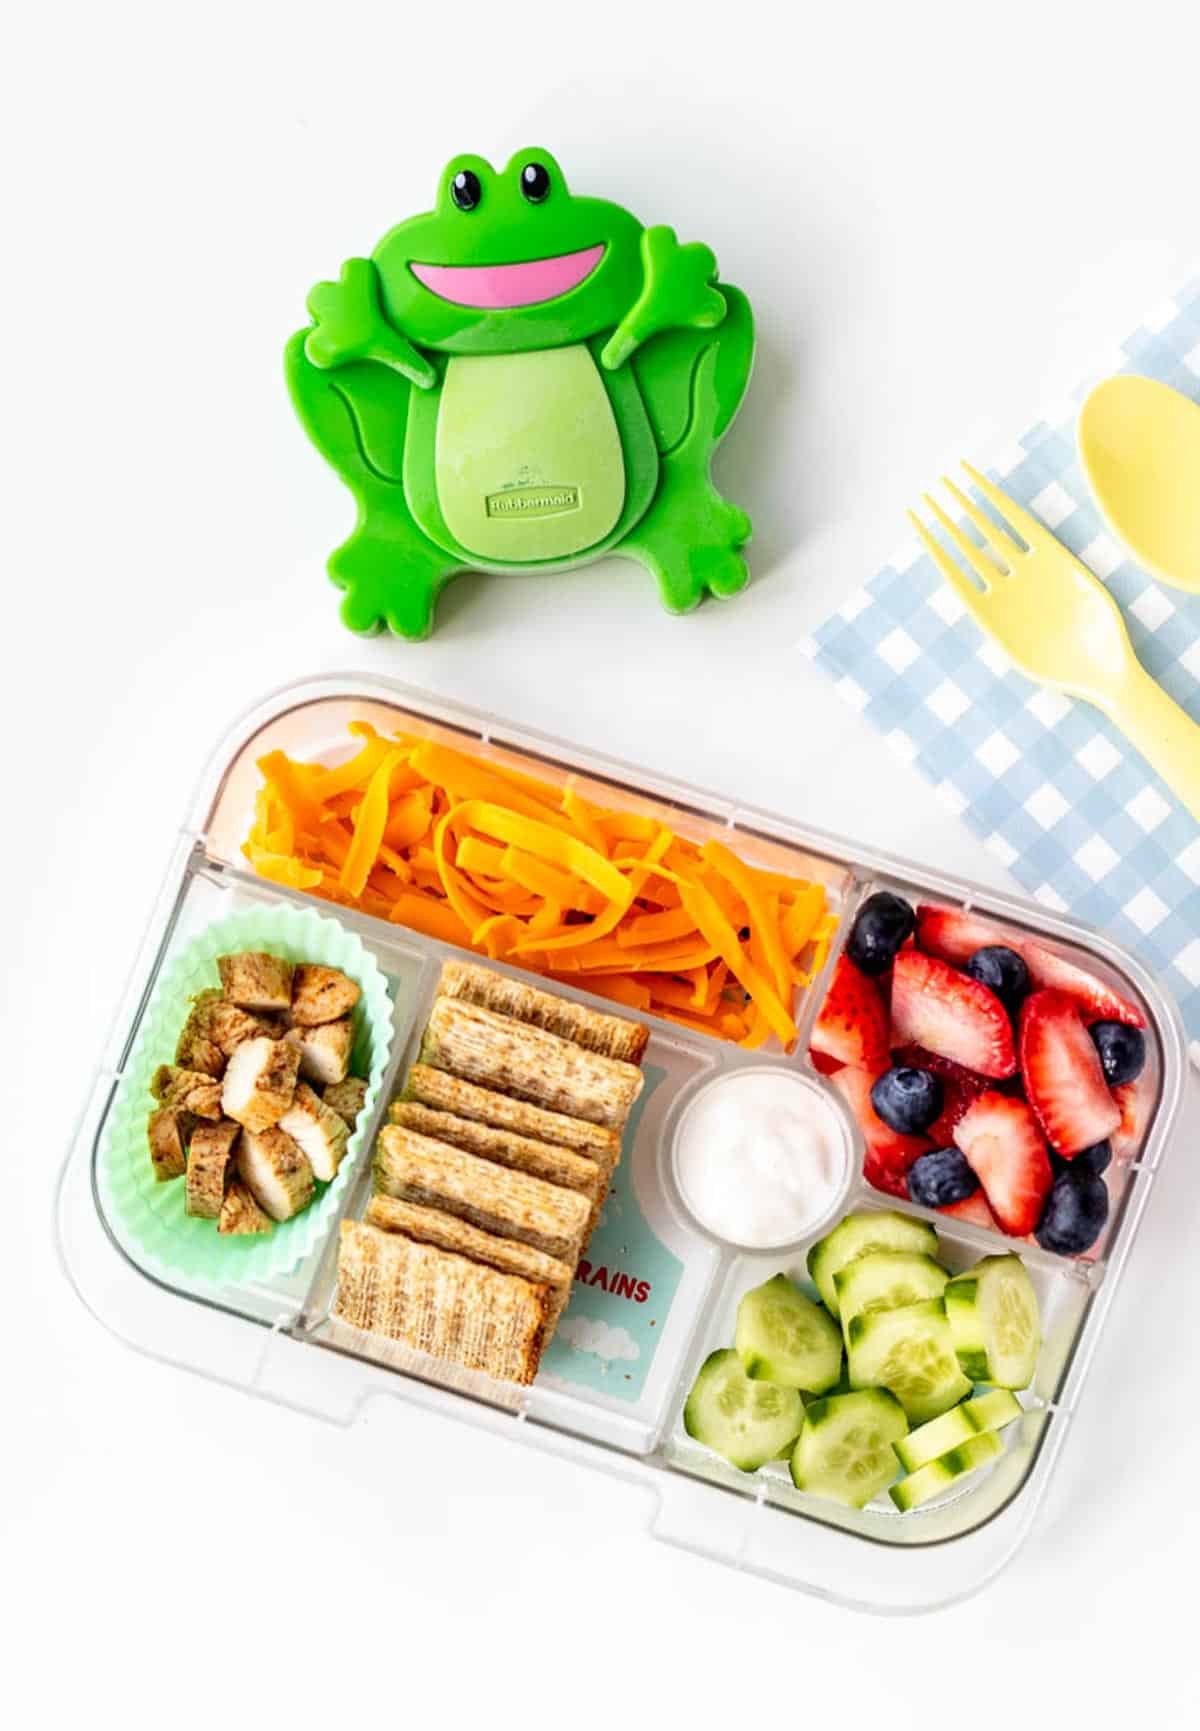 A packed lunch box with a froggie ice pack next to it.